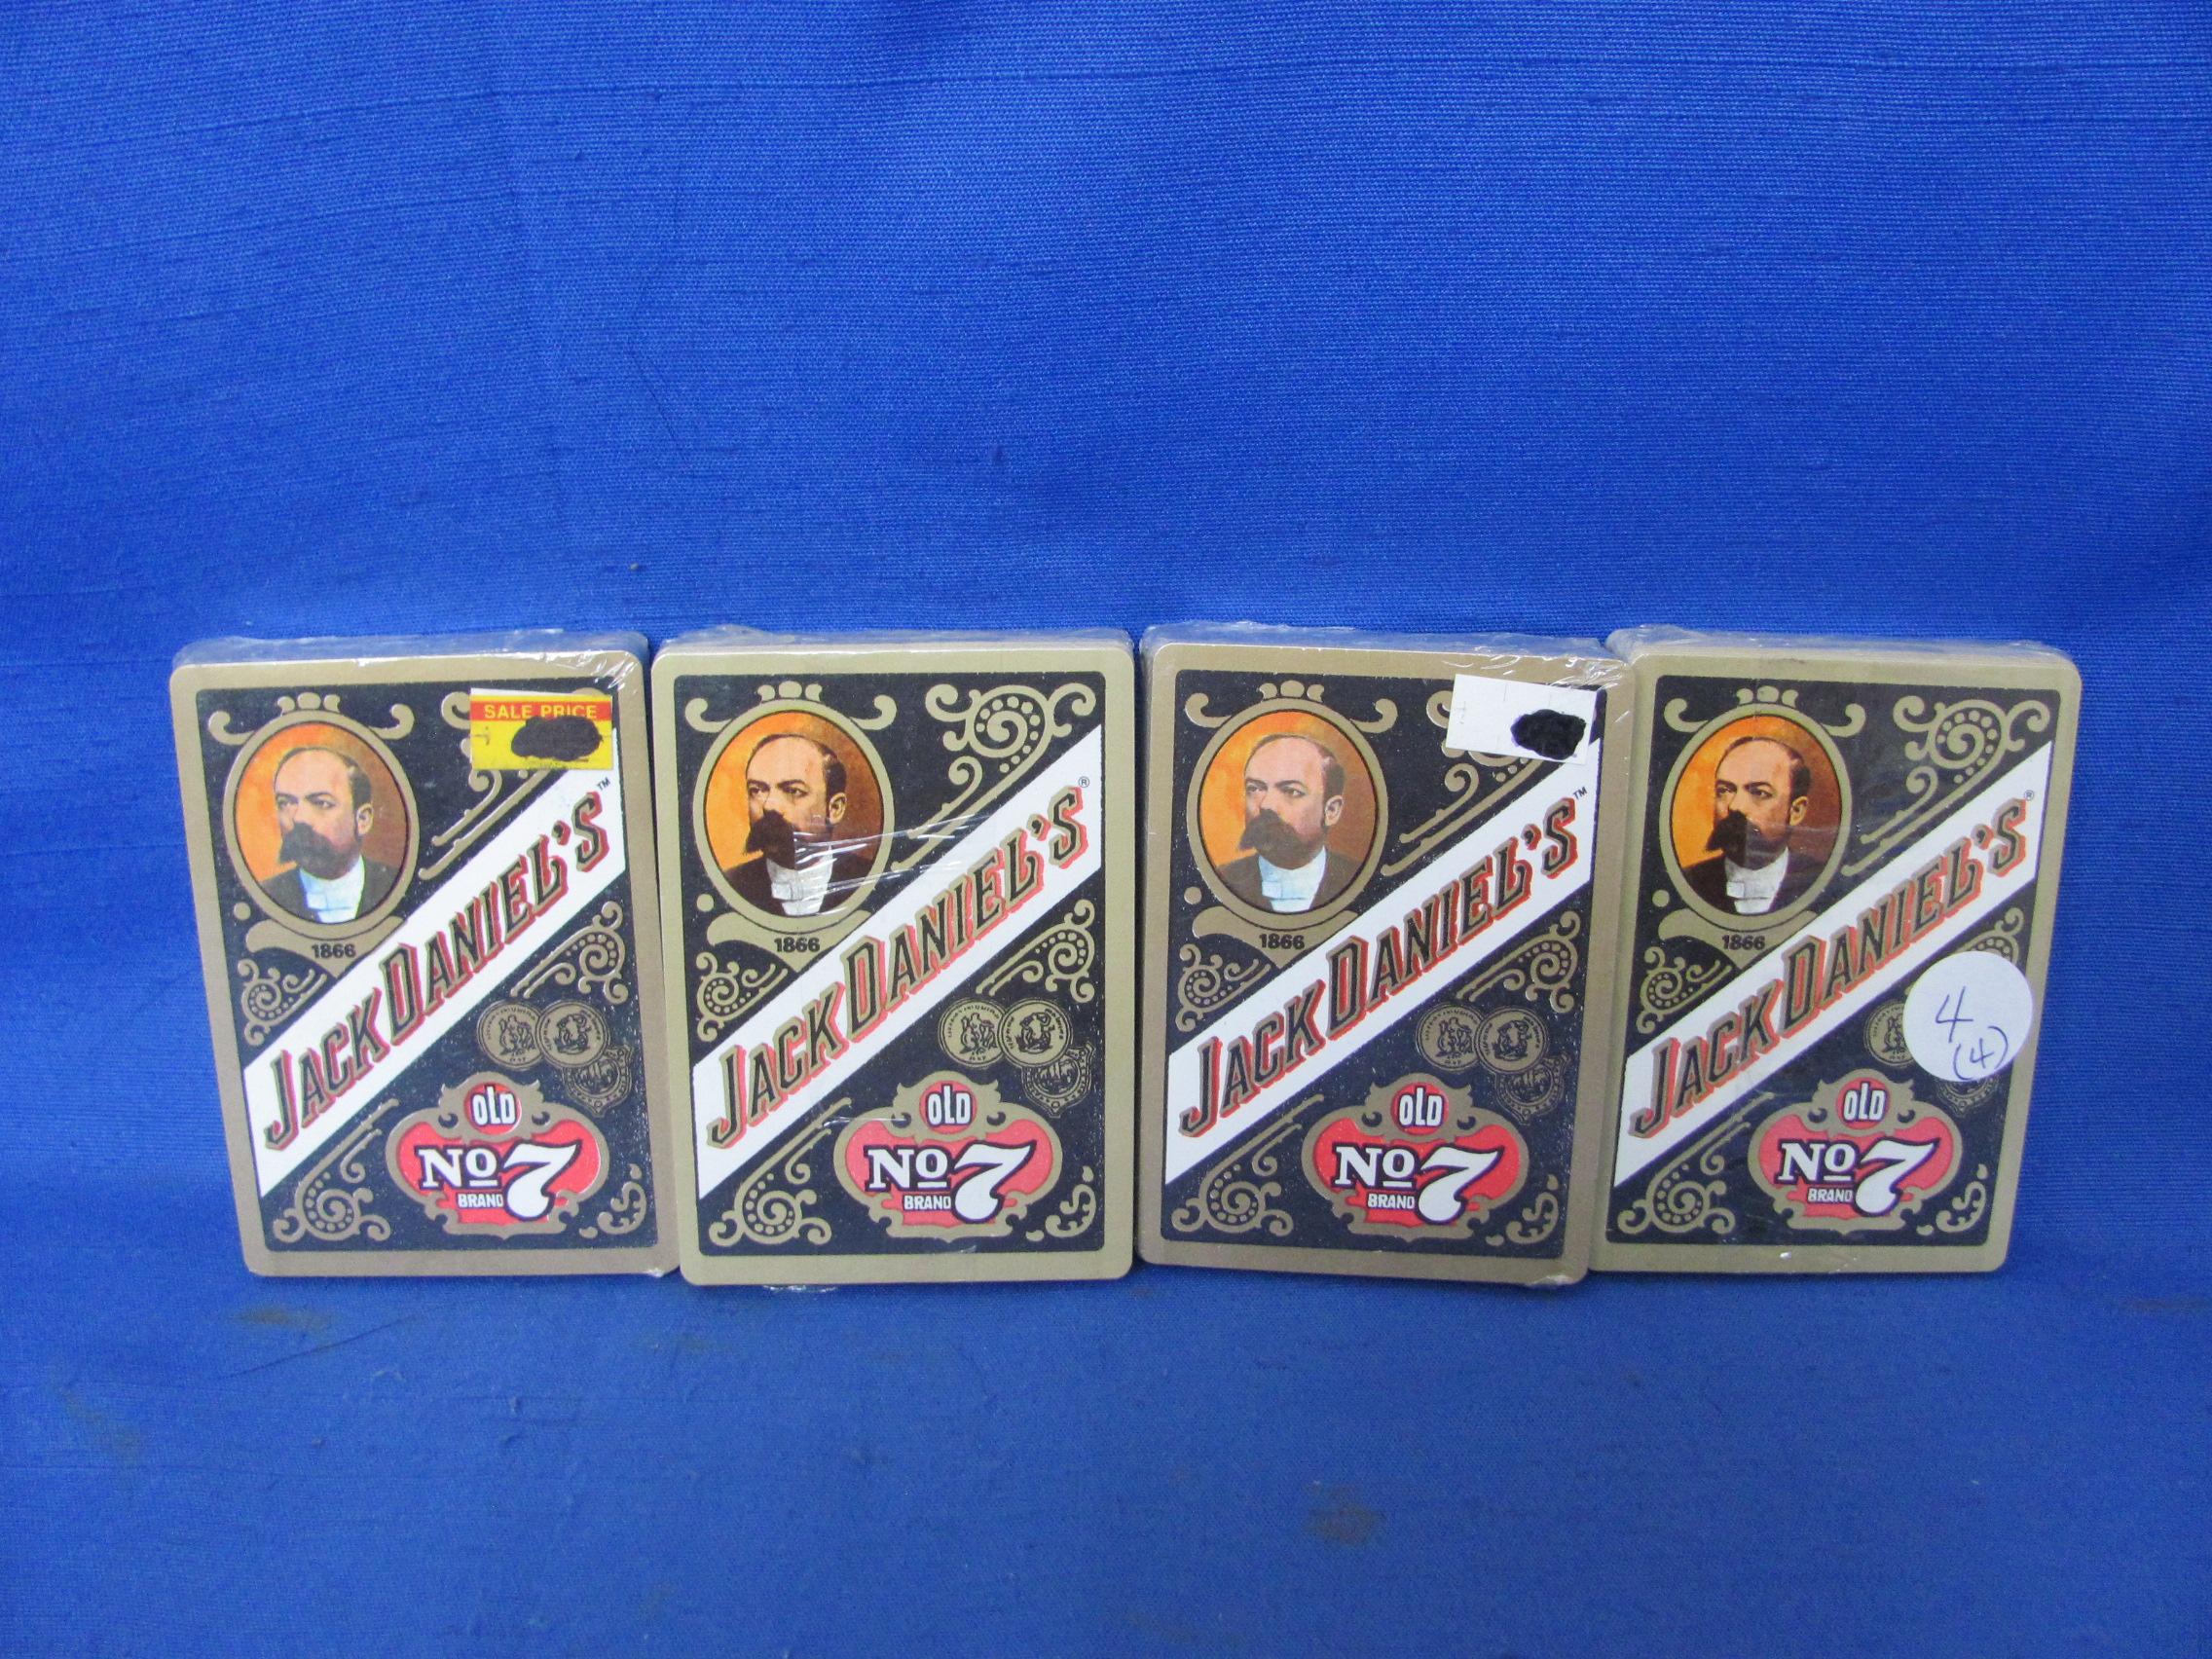 Jack Daniels Old No. 7 Brand Playing Cards – 4 Decks – All Sealed – As Shown